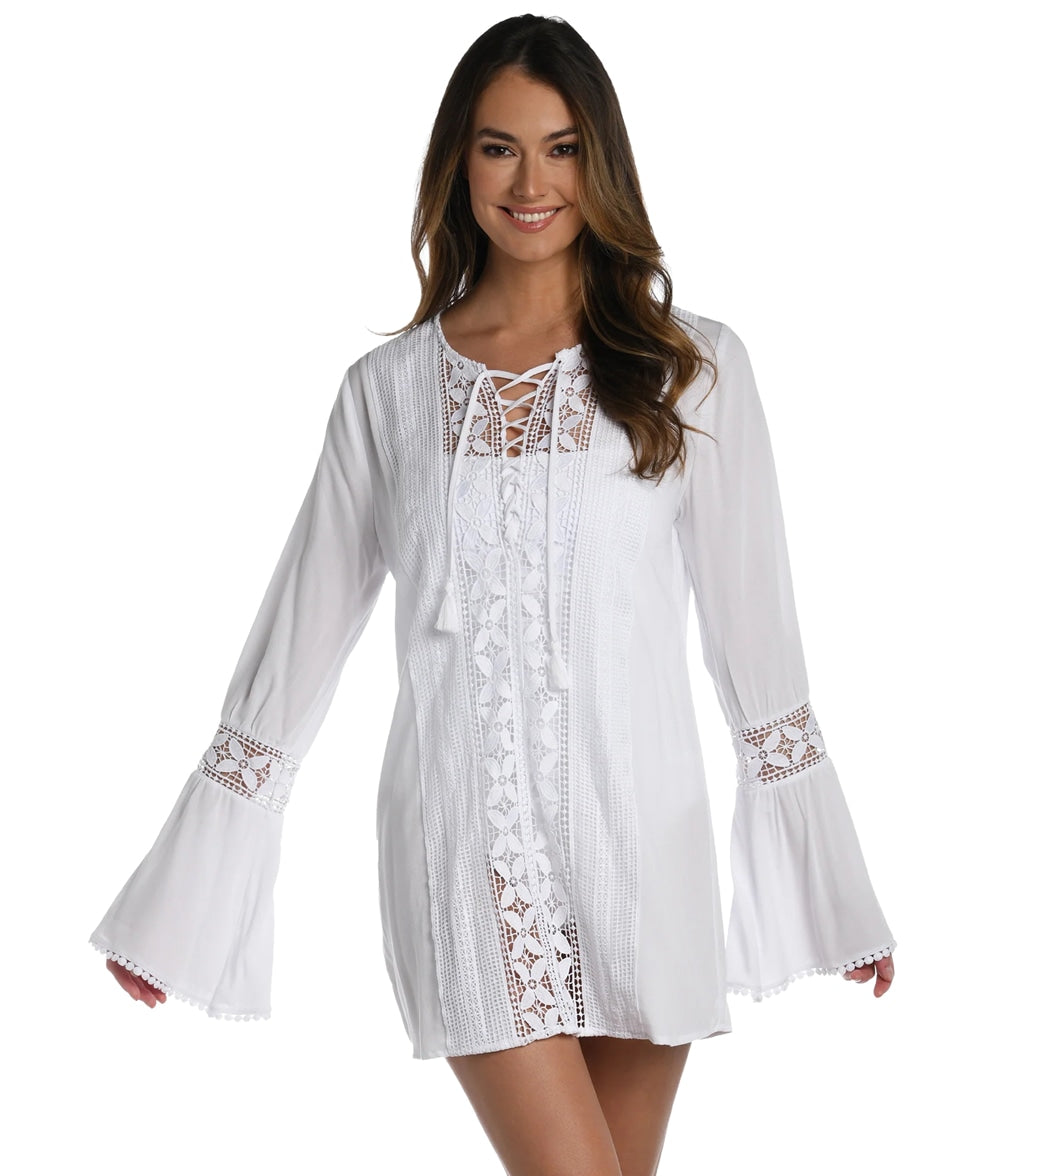 La Blanca Womens Coastal Covers Lace Up Cover Up Tunic